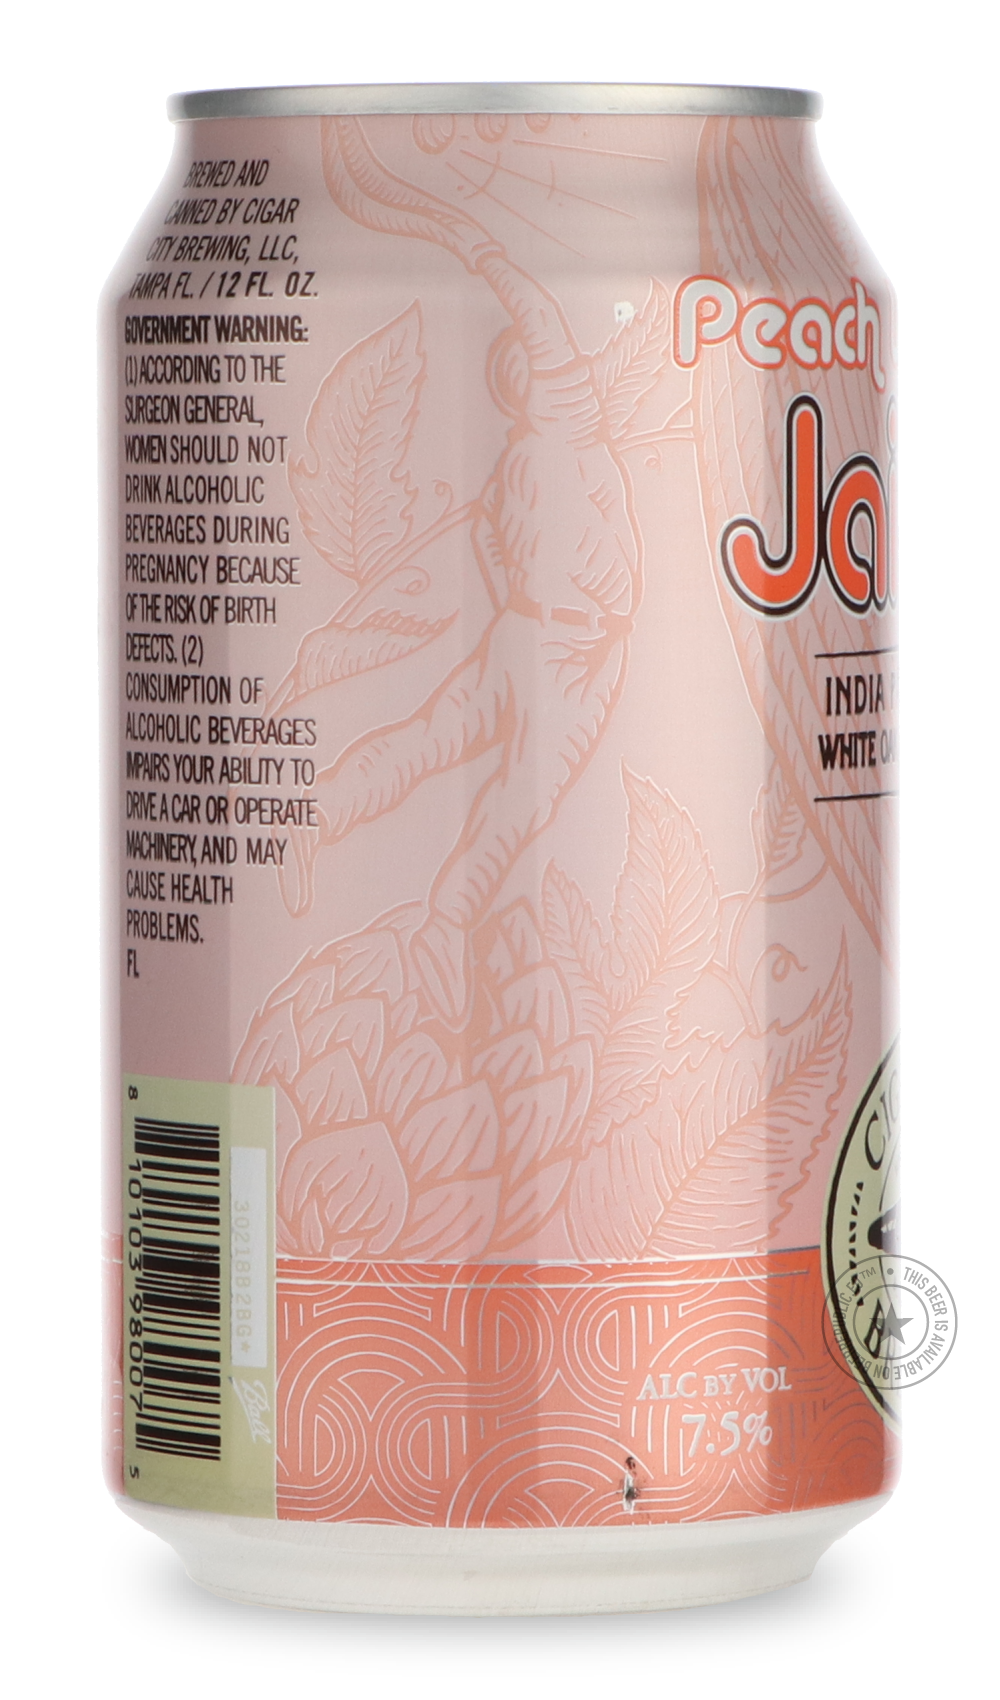 -Cigar City- Peach White Oak Jai Alai®-IPA- Only @ Beer Republic - The best online beer store for American & Canadian craft beer - Buy beer online from the USA and Canada - Bier online kopen - Amerikaans bier kopen - Craft beer store - Craft beer kopen - Amerikanisch bier kaufen - Bier online kaufen - Acheter biere online - IPA - Stout - Porter - New England IPA - Hazy IPA - Imperial Stout - Barrel Aged - Barrel Aged Imperial Stout - Brown - Dark beer - Blond - Blonde - Pilsner - Lager - Wheat - Weizen - Am